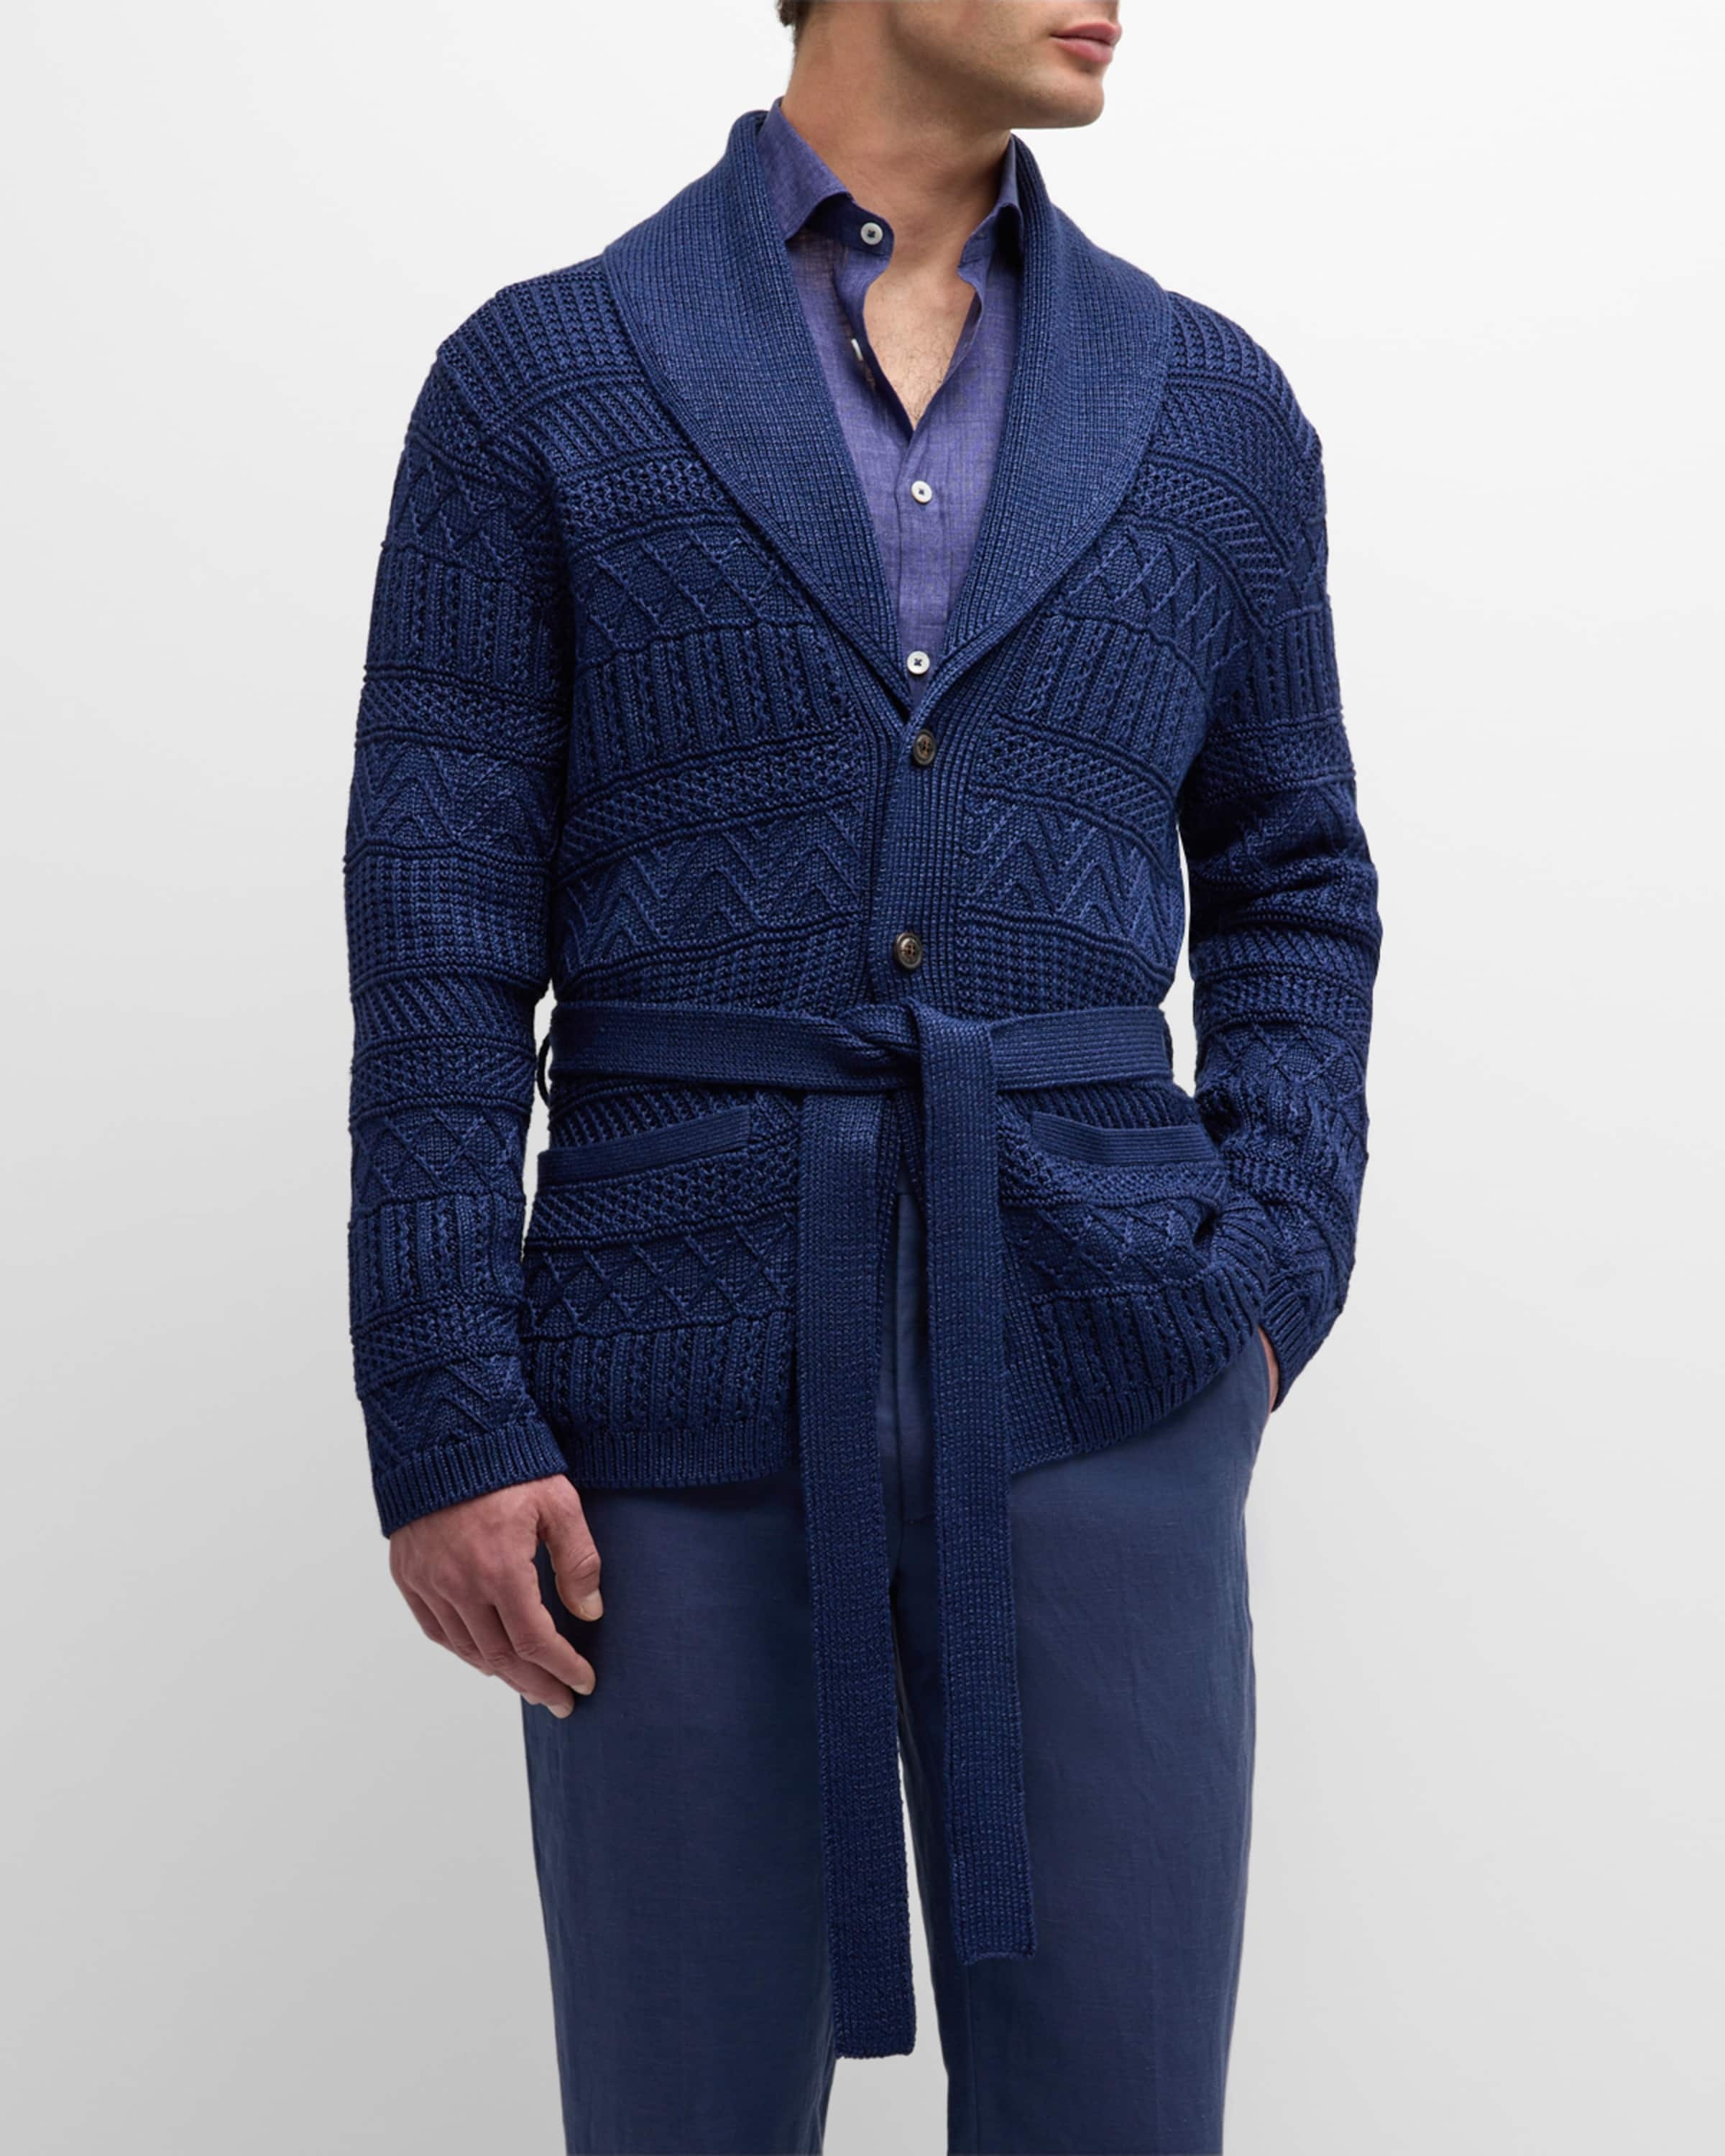 Men's Textured Knit Belted Cardigan - 2